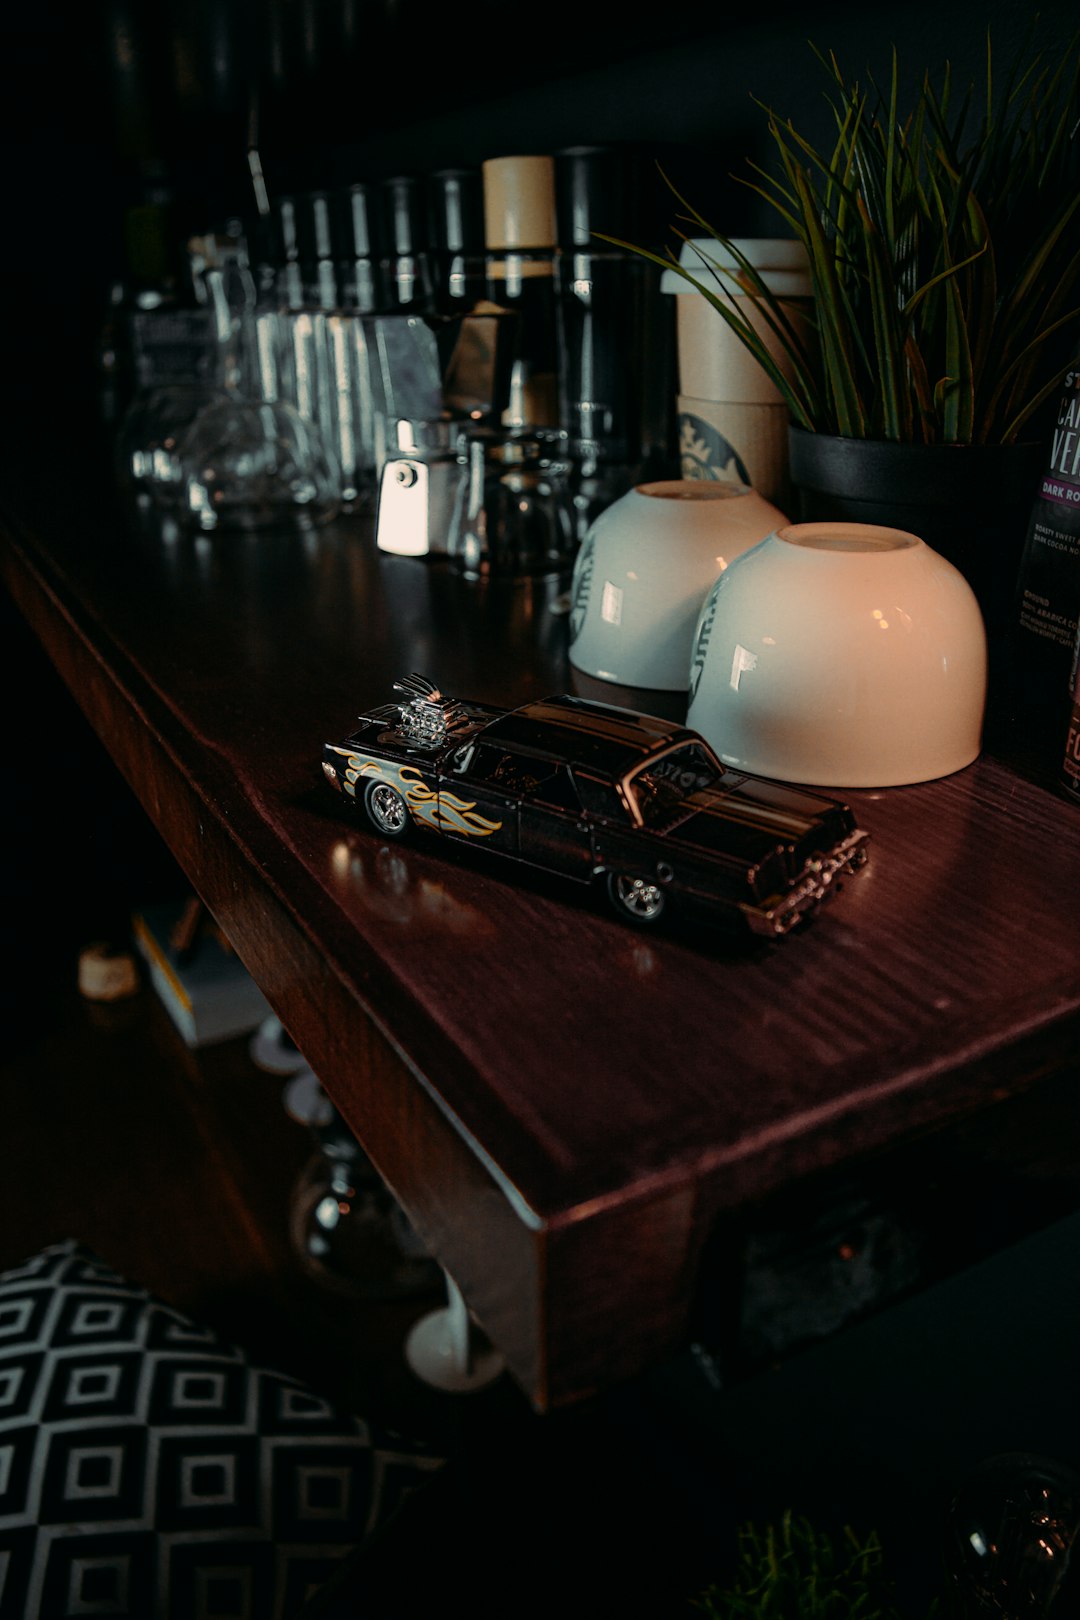 black and white car scale model on brown wooden table